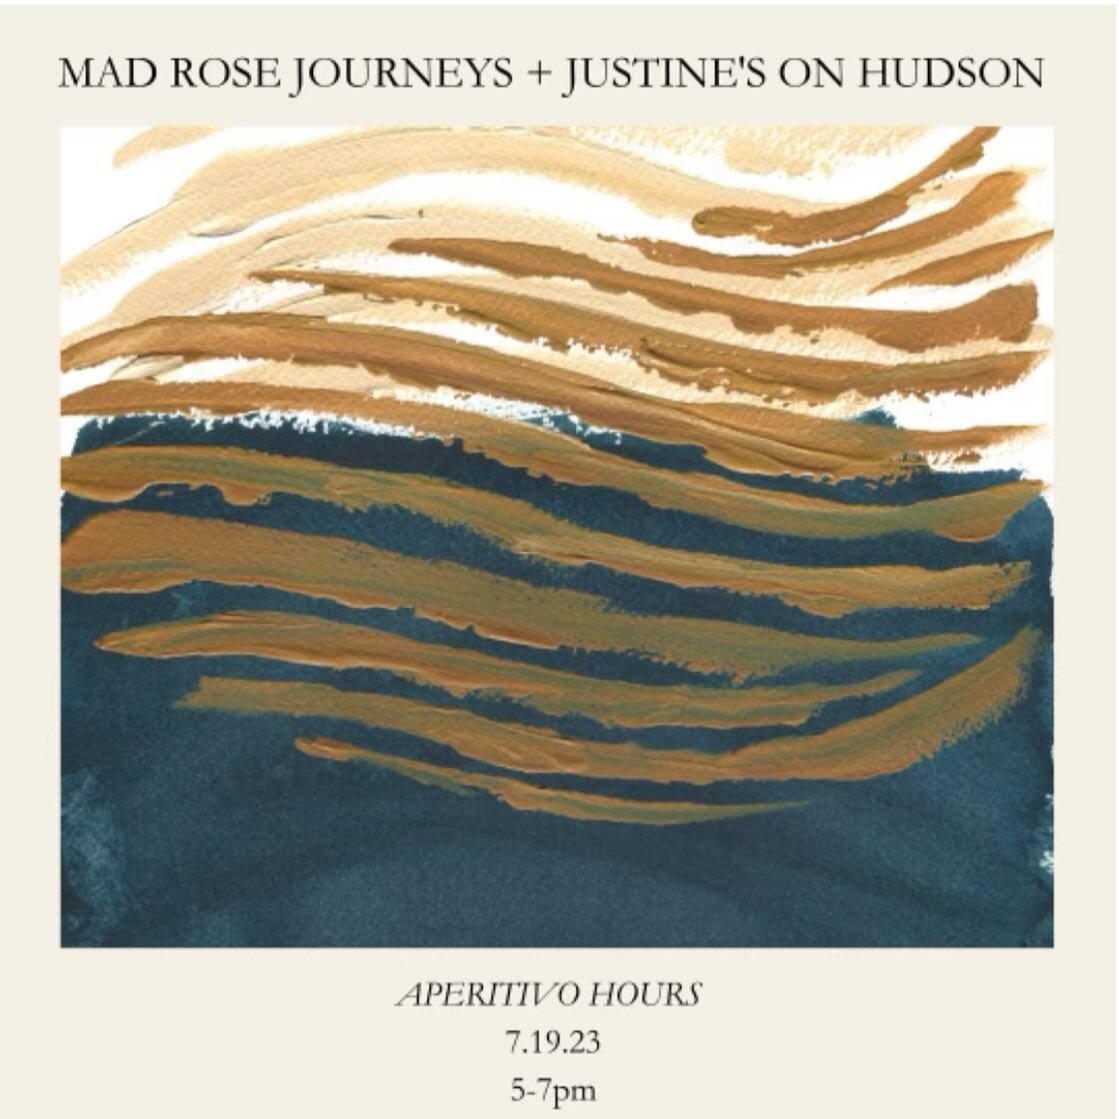 Join us @justinesonhudson next Wednesday, July 19th.
 
Enjoy the Italian flavors, shared stories, and delightful surprises that inspired two family companies; Mad Rose Journeys and our beloved Justine's on Hudson.
 
Indulge in aperitivos, truffles, a